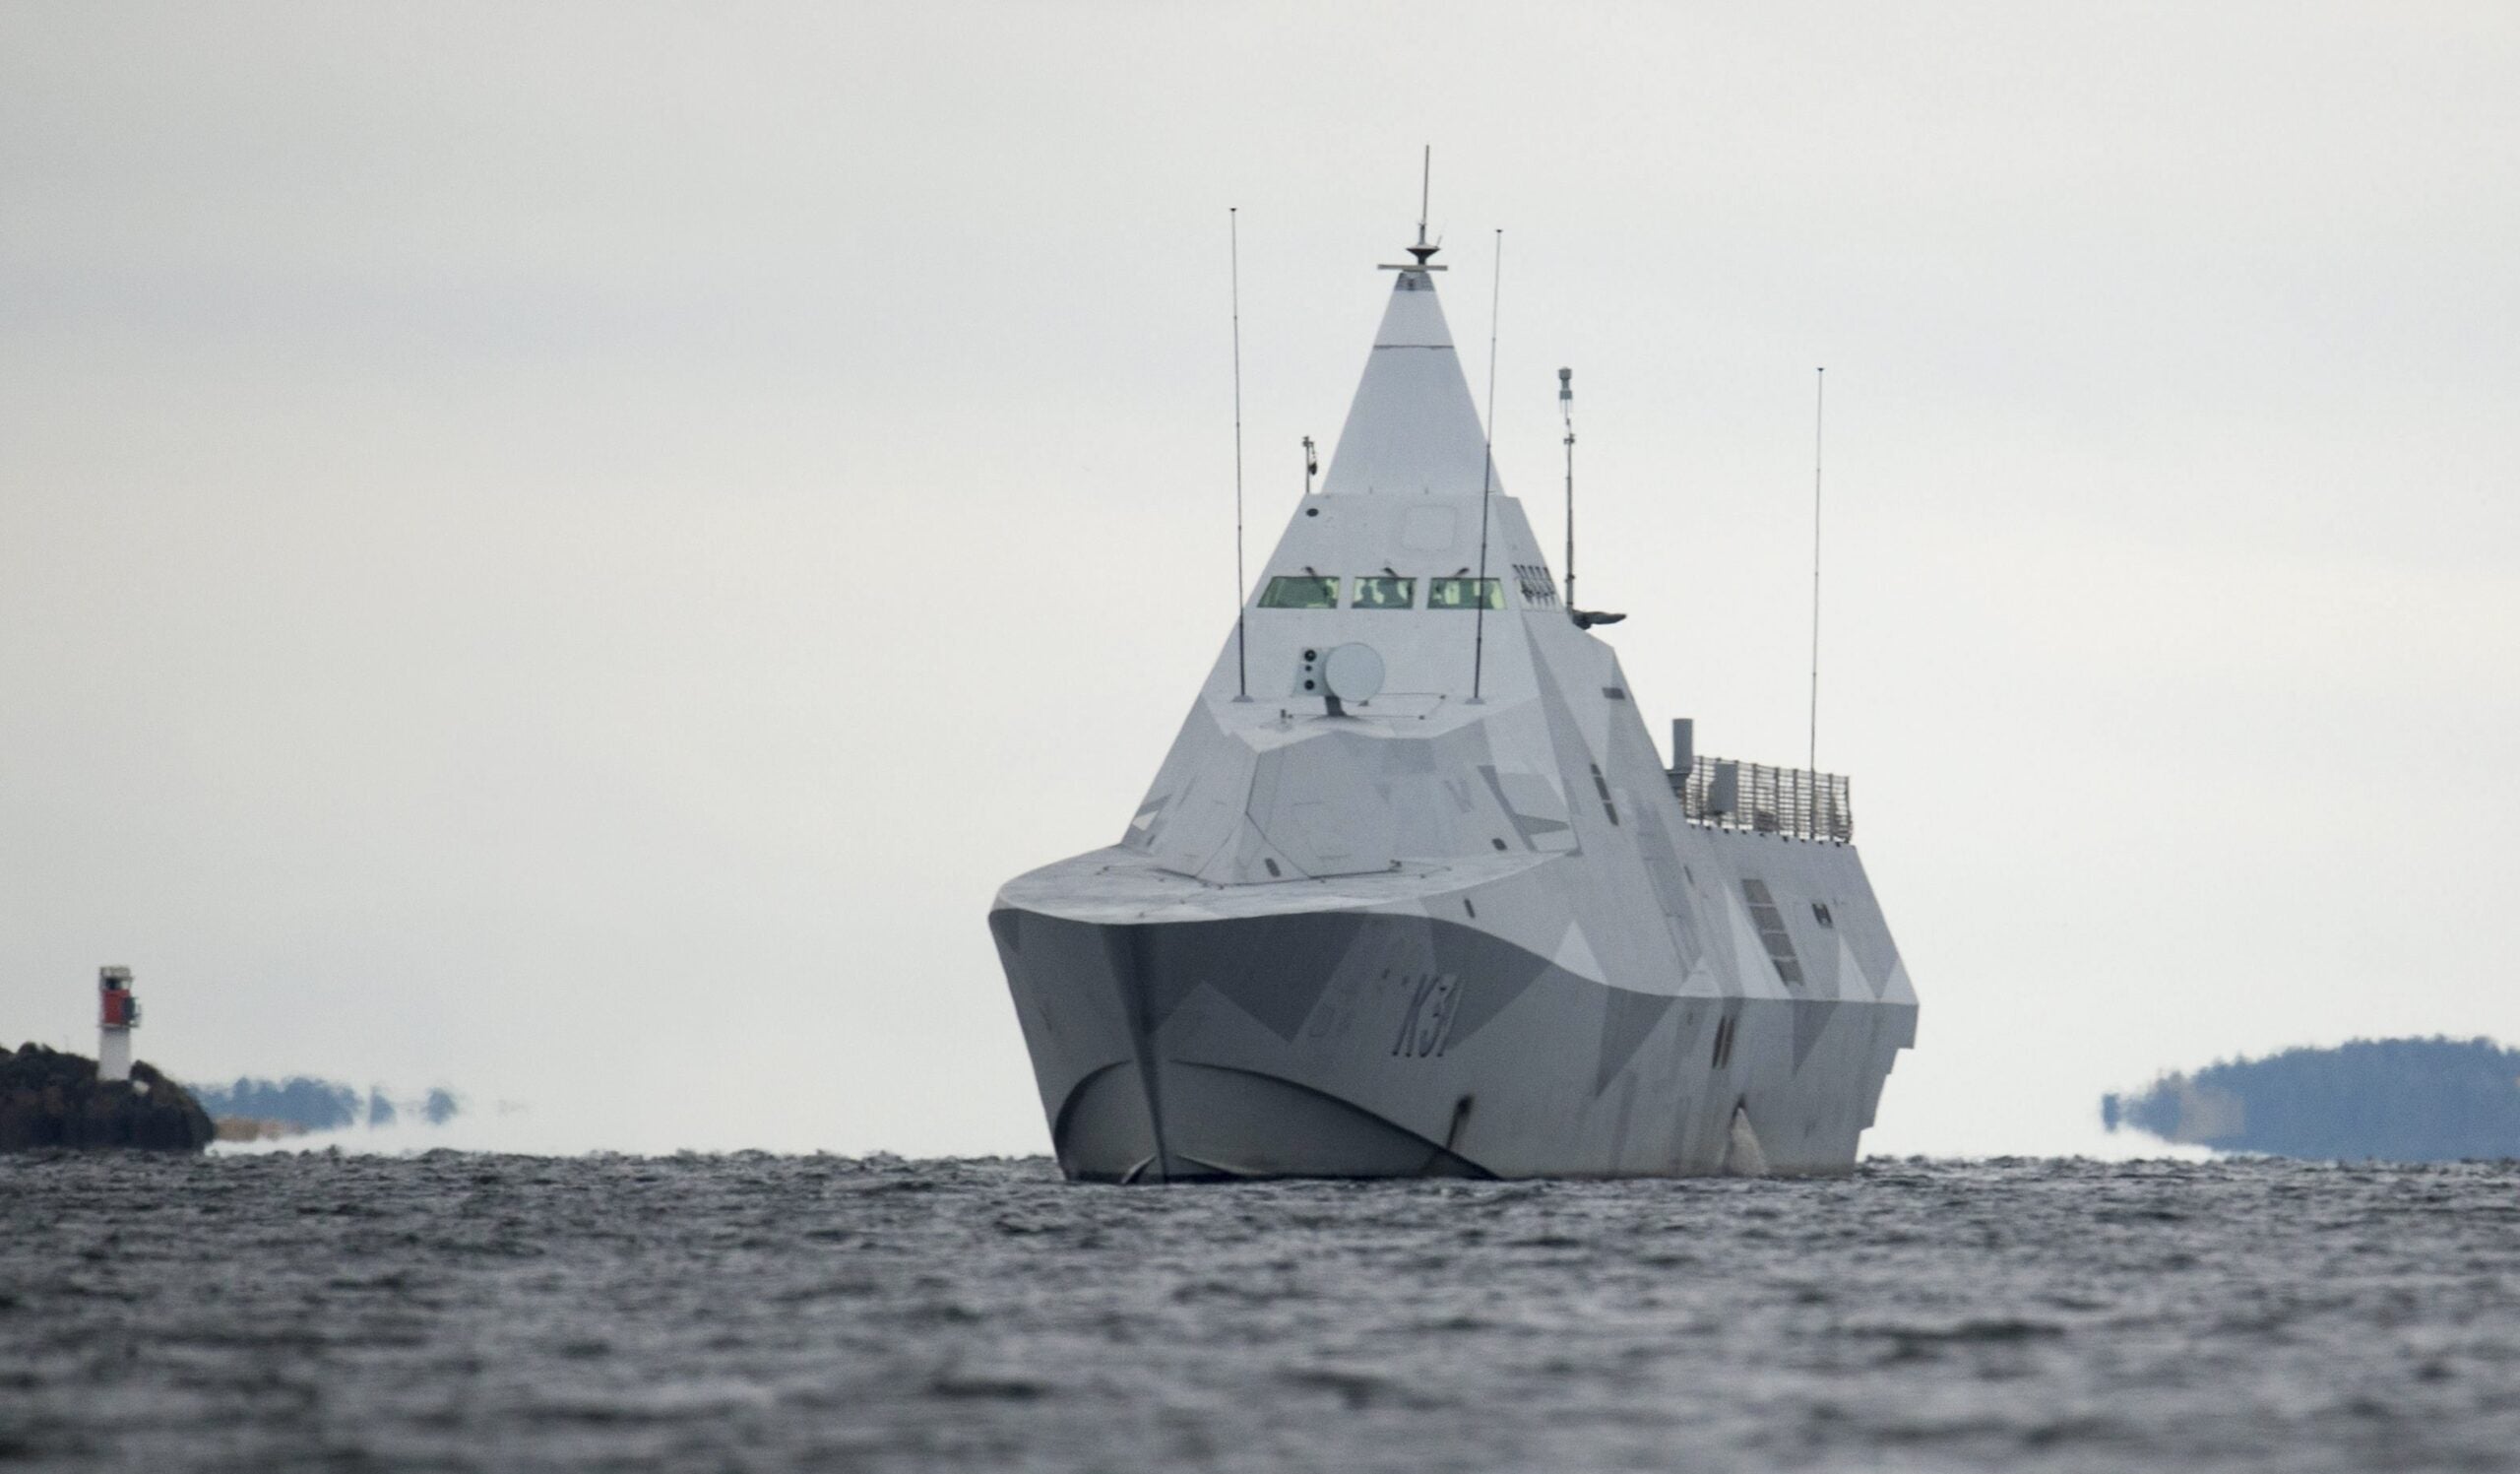 The Swedish corvette HMS Visby under way on the Mysingen Bay on October 21, 2014 on their fifth day of searching for a suspected foreign vessel in the Stockholm archipelago. The search was being extended southwards to the open sea about 70 kilometres (44 miles) southeast of Stockholm, as Swedish Prime Minister Stefan Loefven said that more military exercises were being carried out in the Baltic Sea.  AFP PHOTO / TT NEWS AGENCY / FREDRIK SANDBERG /SWEDEN OUT        (Photo credit should read FREDRIK SANDBERG/AFP via Getty Images)